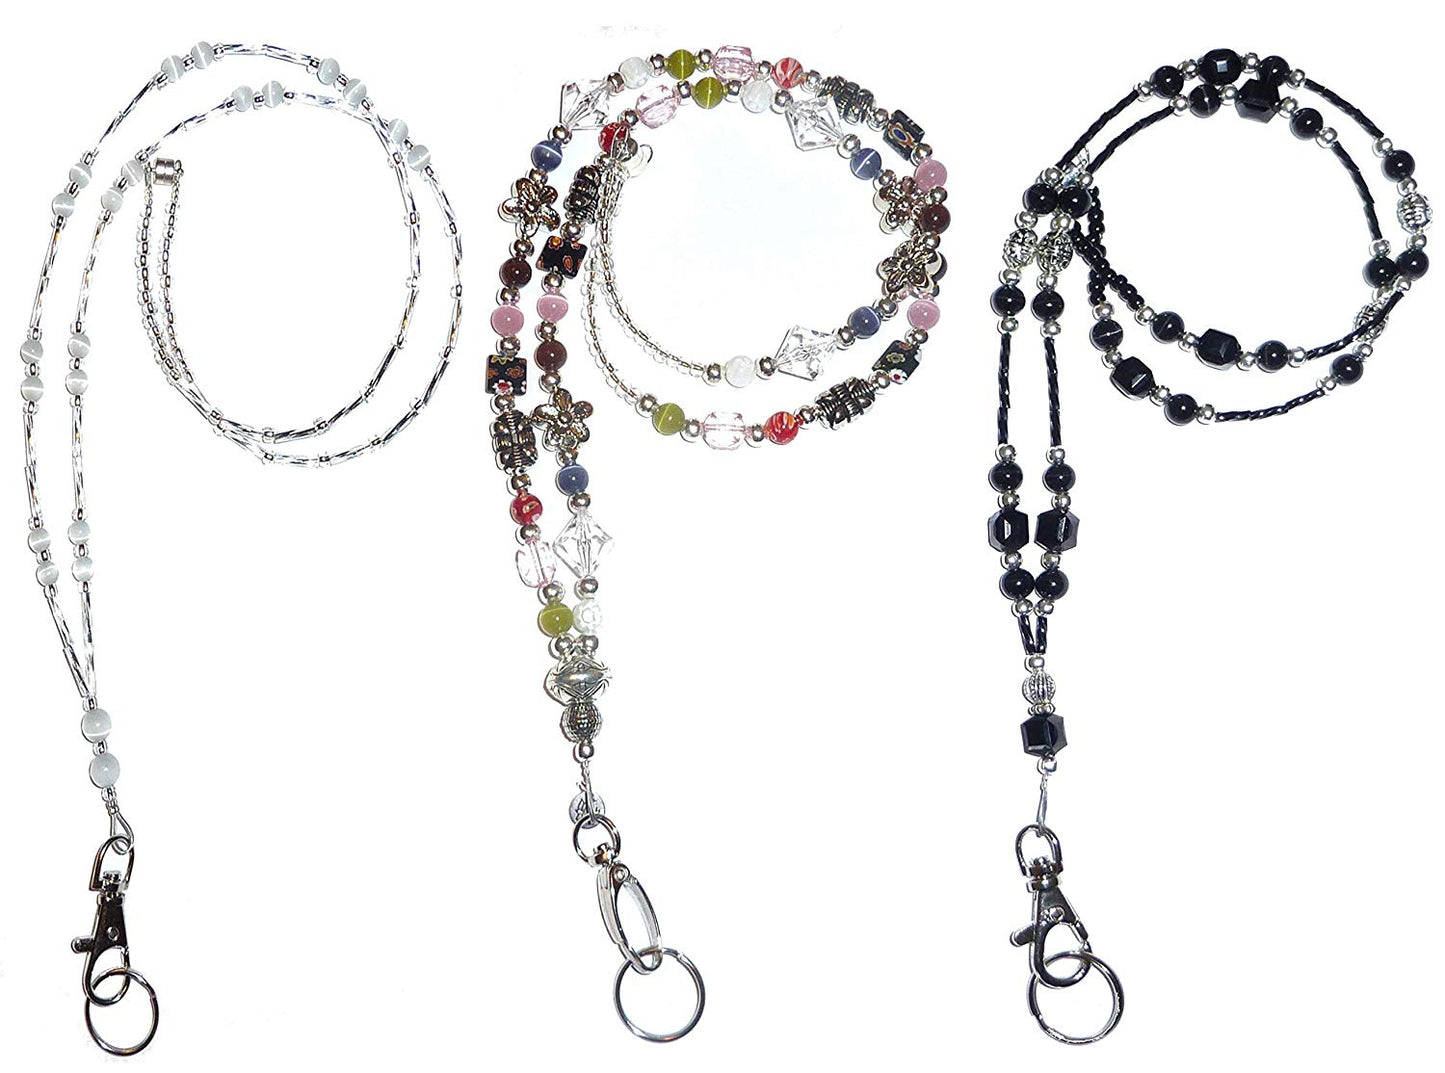 Pack of 3 of Women's Fashion Jewelry Necklace Lanyard- Beaded - Magnetic Breakaway